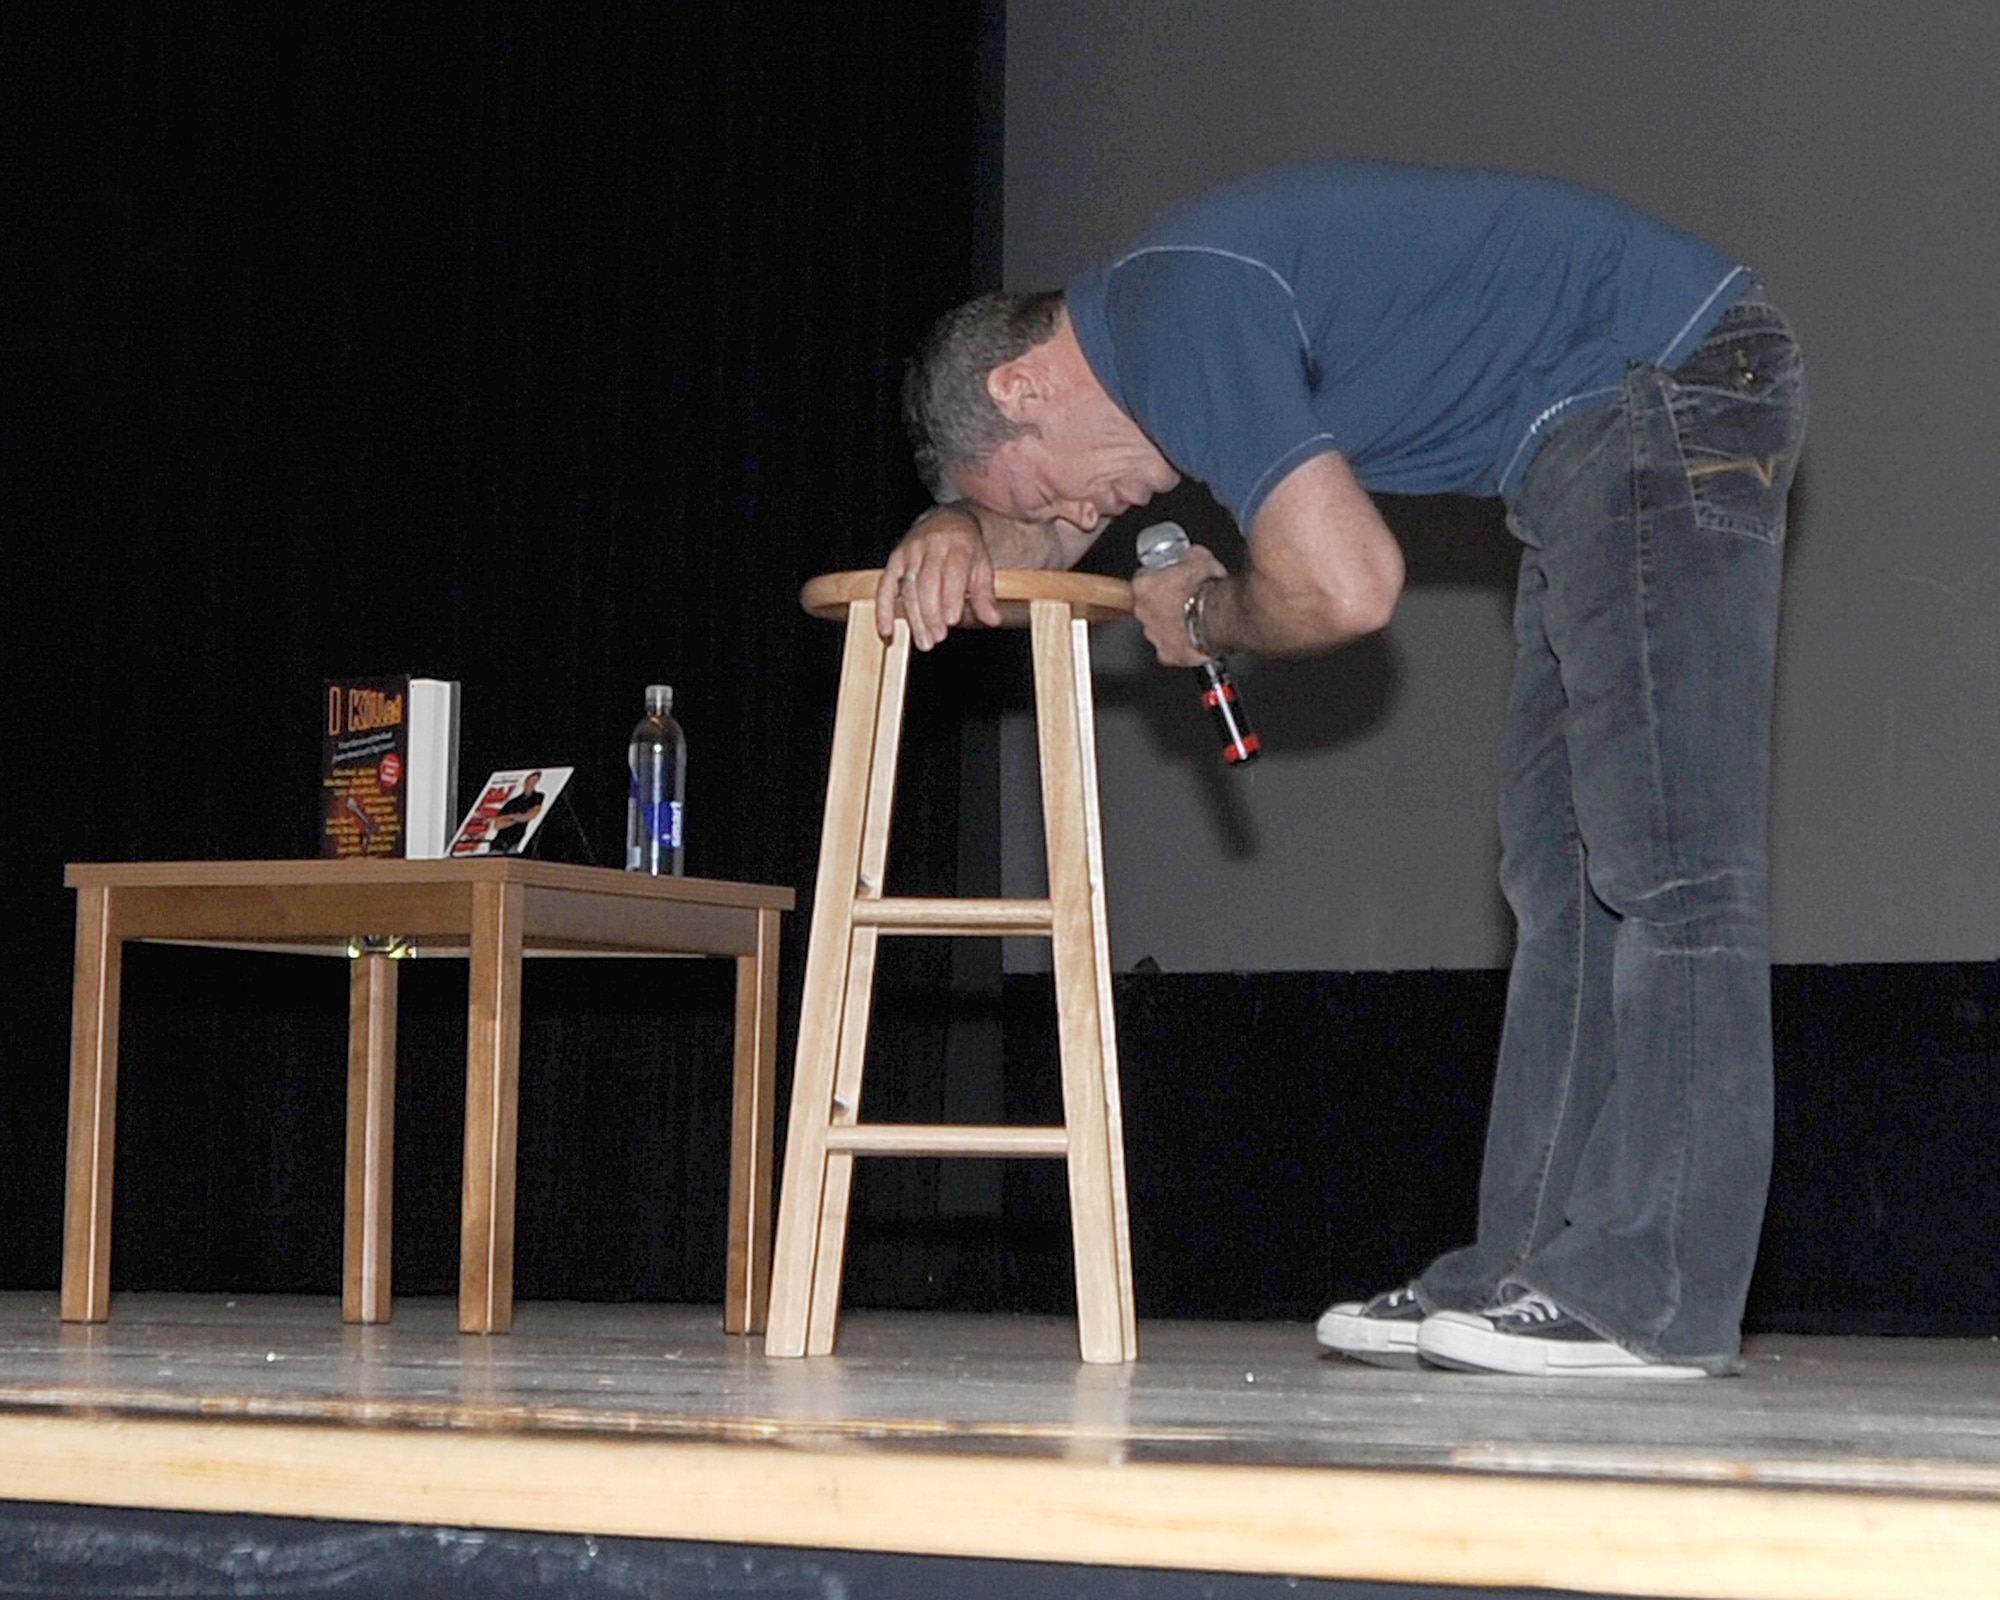 ELMENDORF AIR FORCE BASE, Alaska -- Comedian Bernie McGrenahan performs during his "Happy Hour" tour June 16. McGrenahan's show puts a comedic twist on Alchohol and Drug abuse prevention from his own personal life experiences.(U.S. Air Force photo/Airman 1st Class Kristin High)